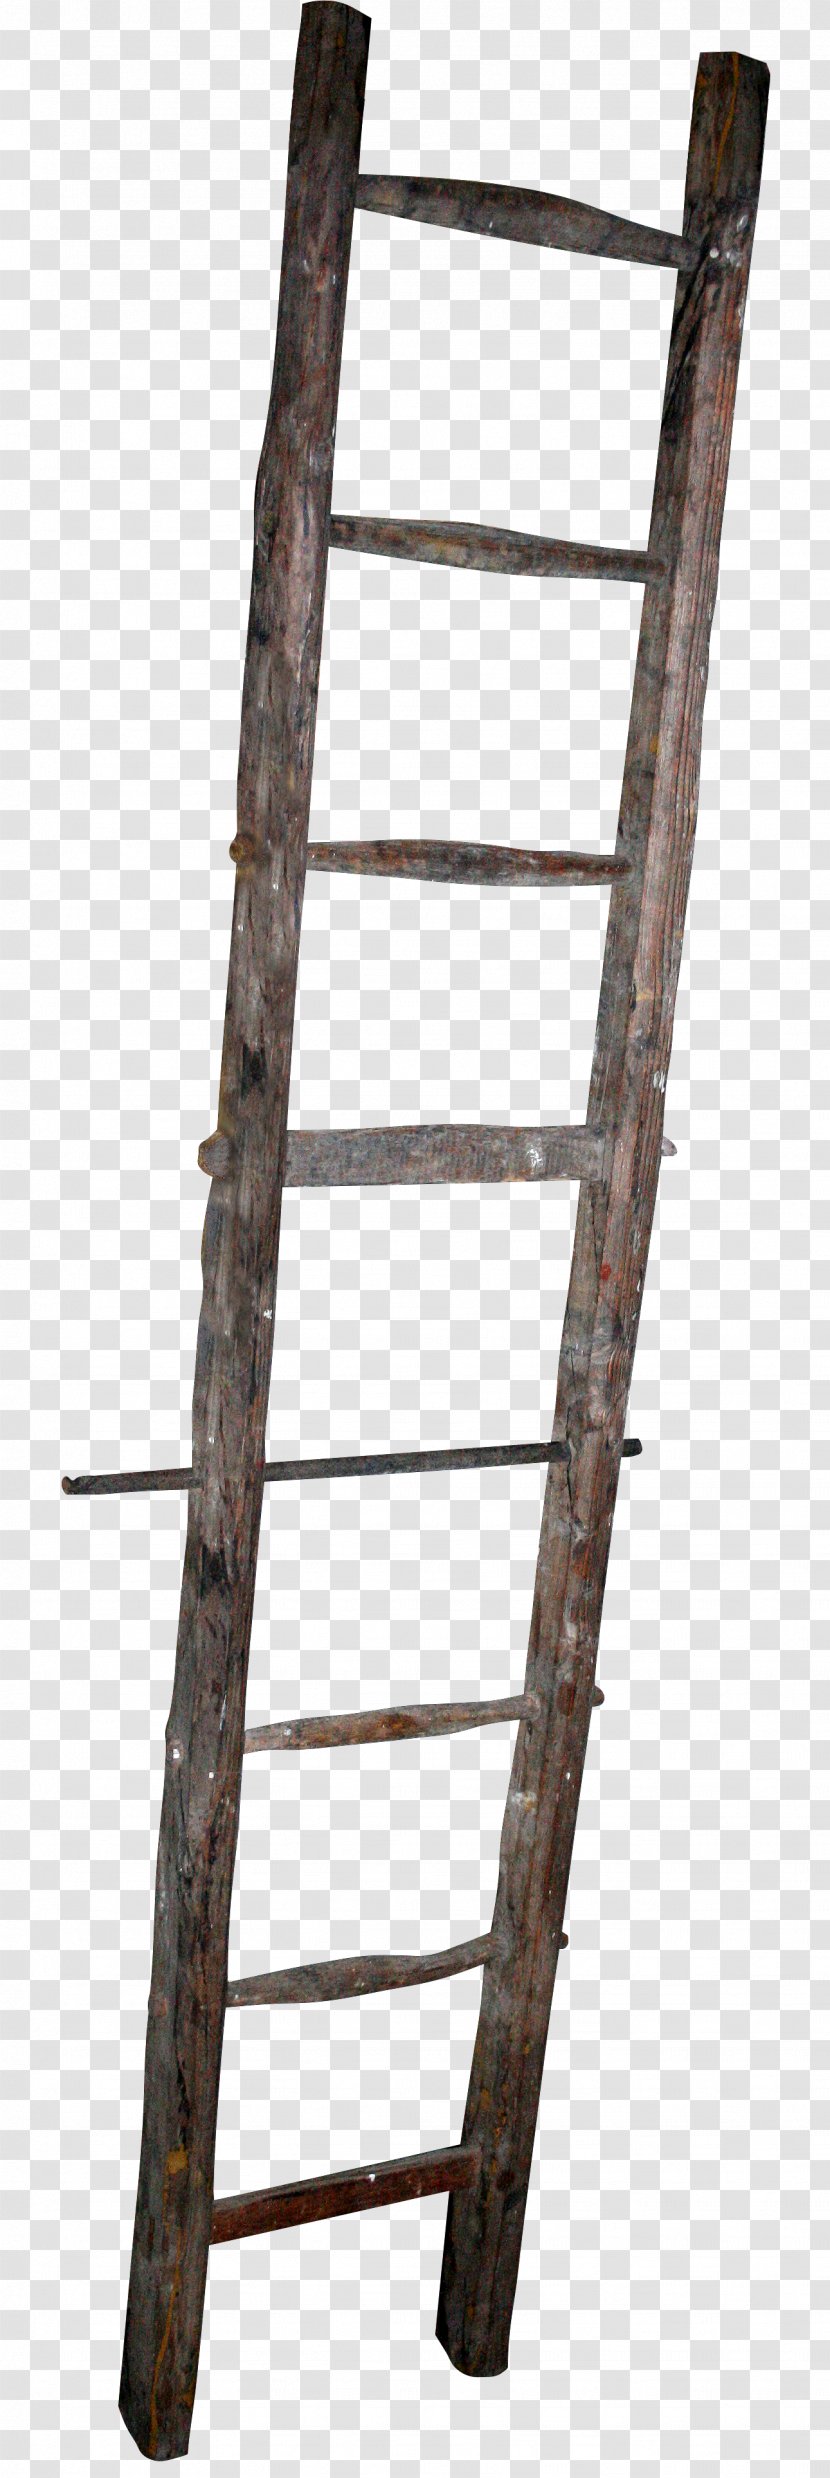 Wood Ladder Stairs - Resource Transparent PNG